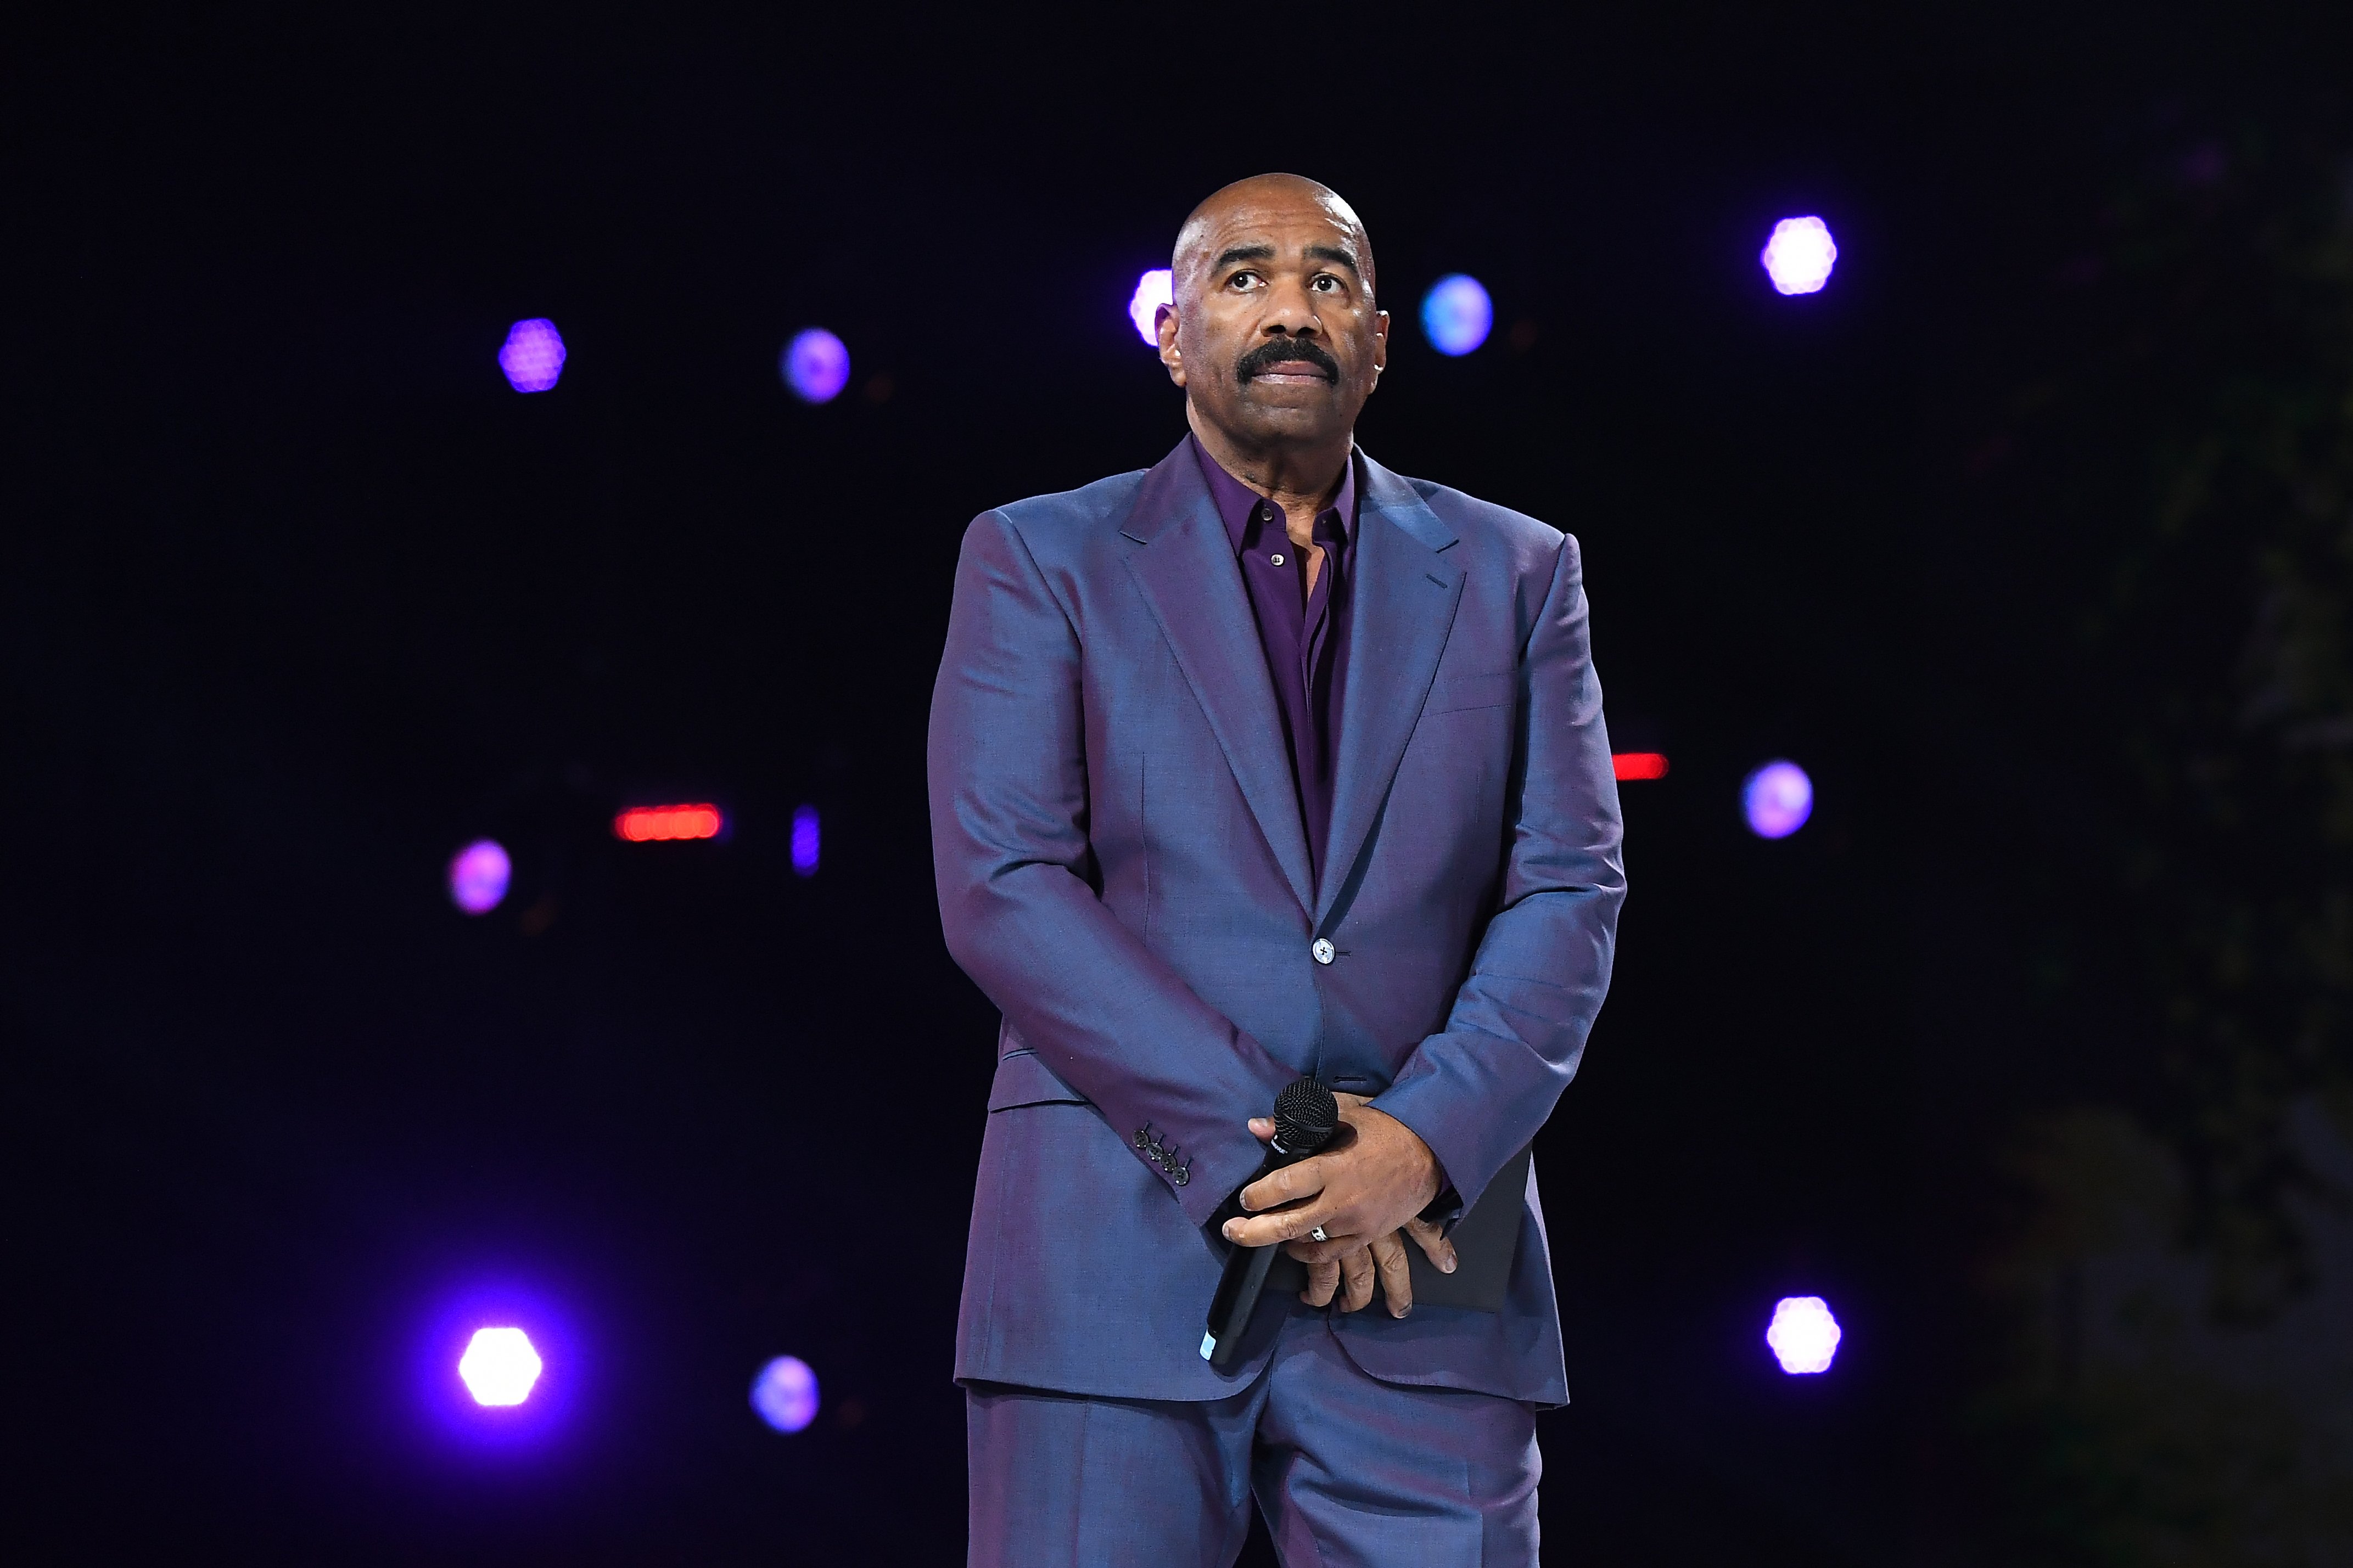 Steve Harvey at the Mercedes-Benz Stadium in Atlanta, Georgia on March 21, 2019. |Photo: Getty Images